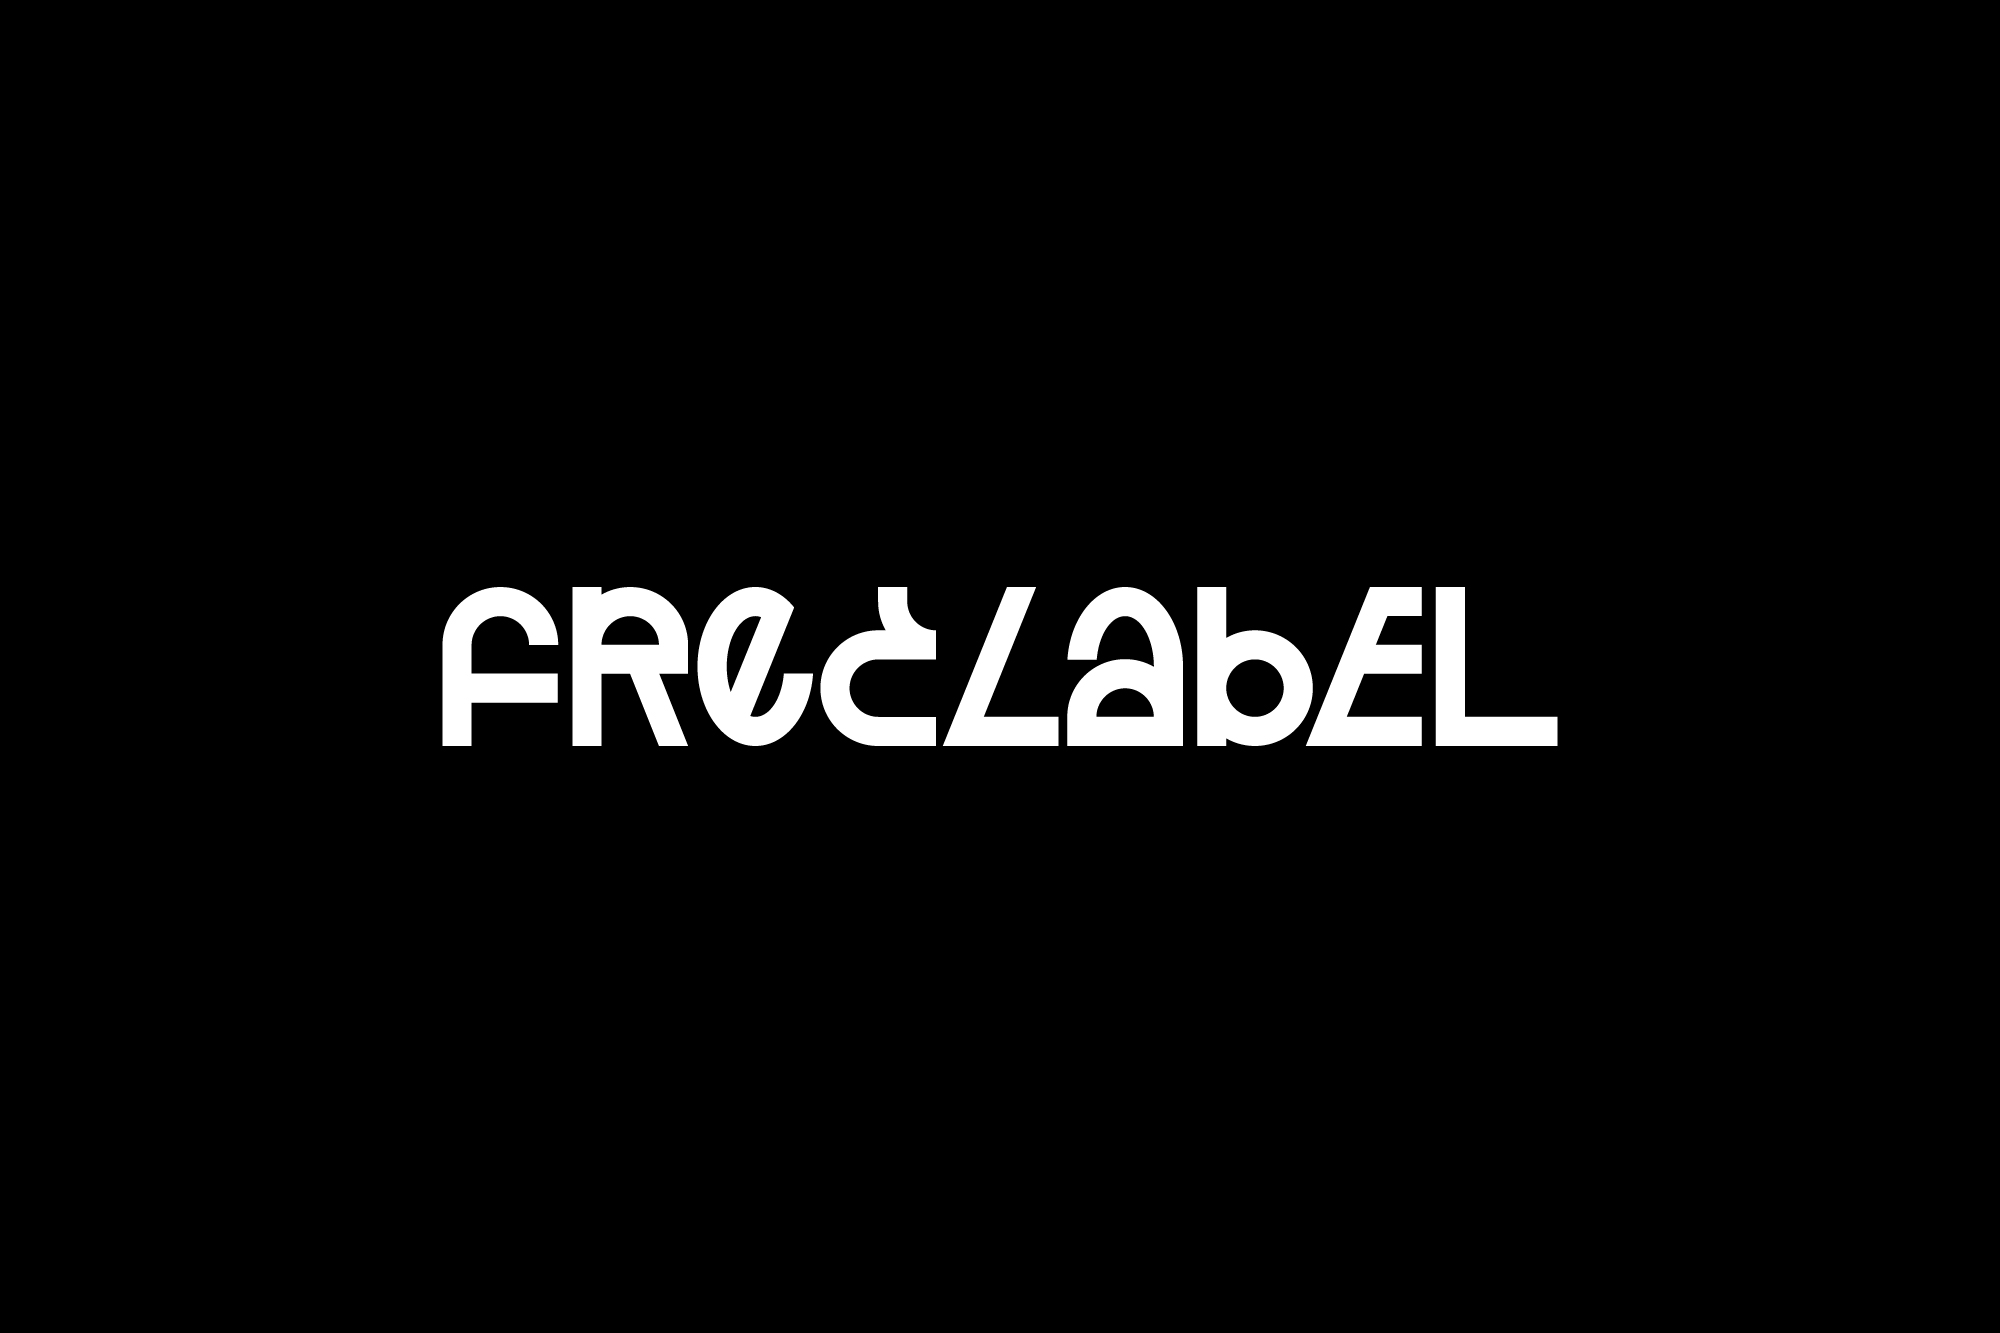 Identity and Typeface for Freelabel Clothing Brand